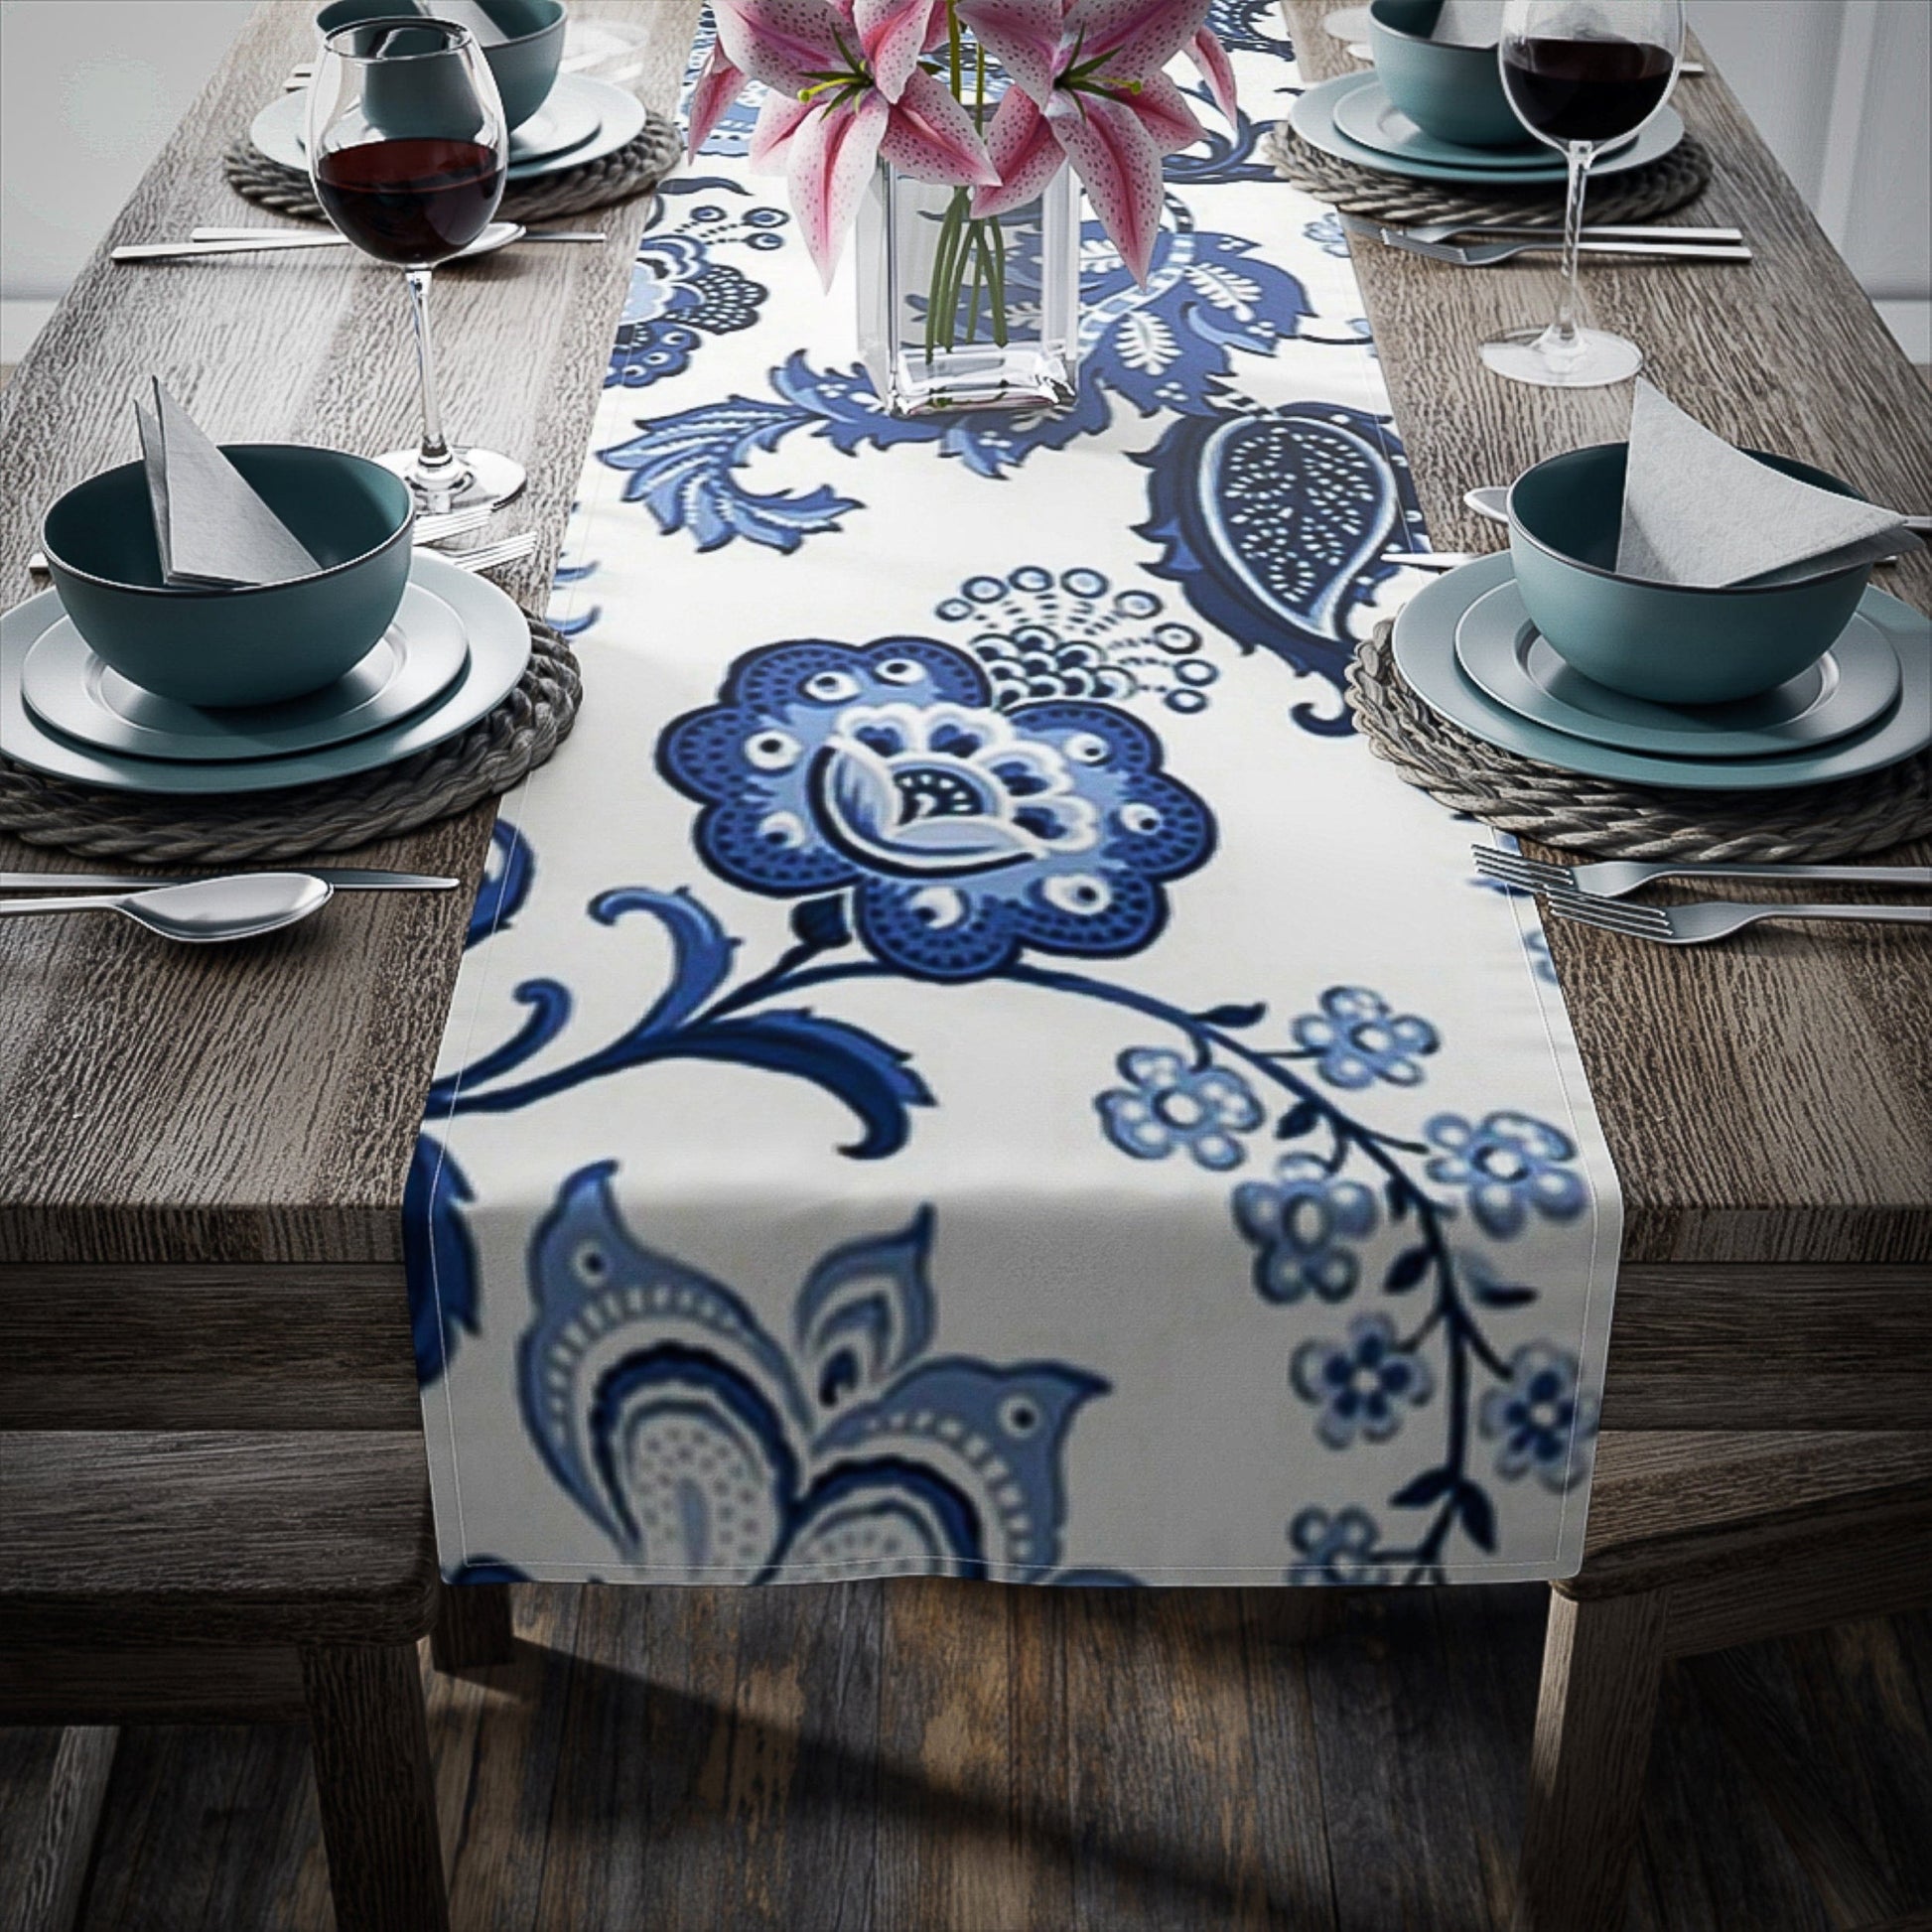 Kate McEnroe New York Table Runner in Luxury Blue and White Floral Chinoiserie Table Runners